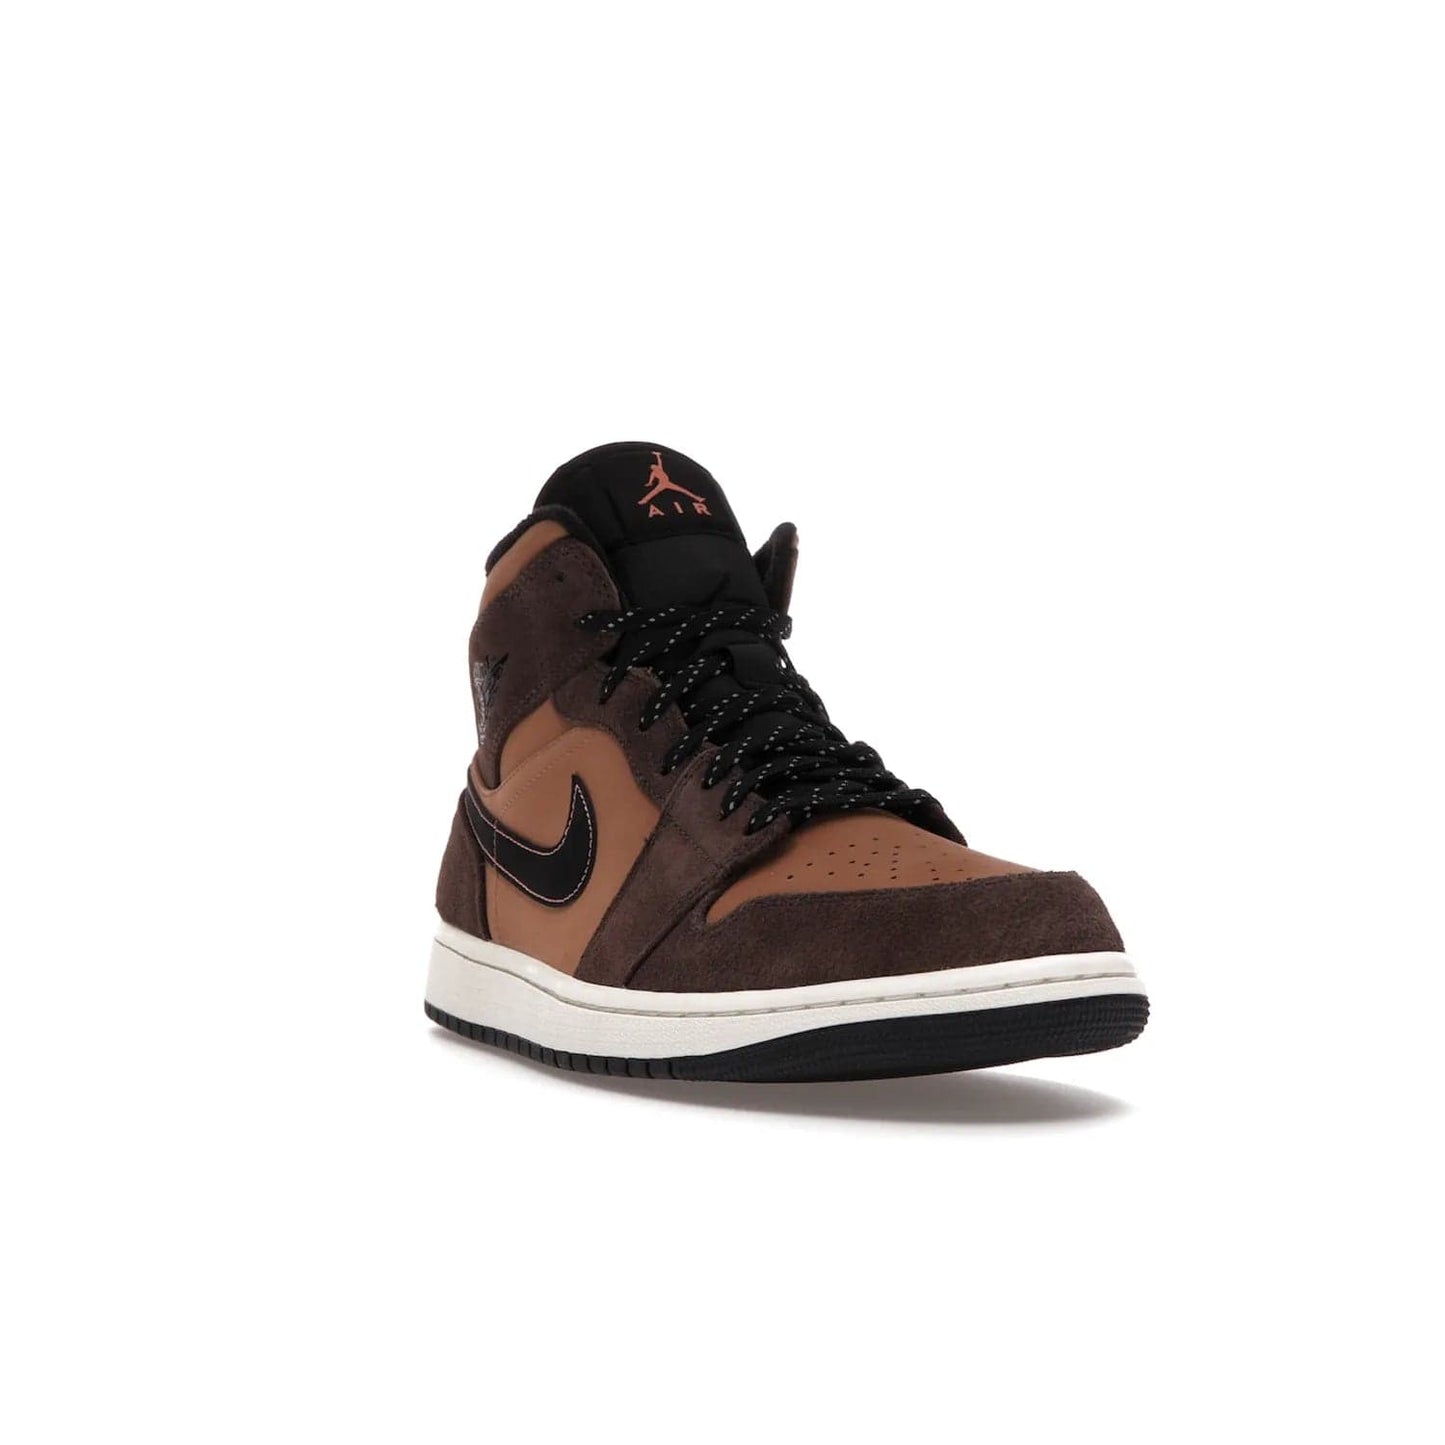 Jordan 1 Mid SE Dark Chocolate - Image 7 - Only at www.BallersClubKickz.com - This fashionable and functional Jordan 1 Mid SE Dark Chocolate features a light brown Durabuck upper, dark brown suede overlays, black Swoosh logos and reflective patch at heel. A must-have for any sneakerhead!